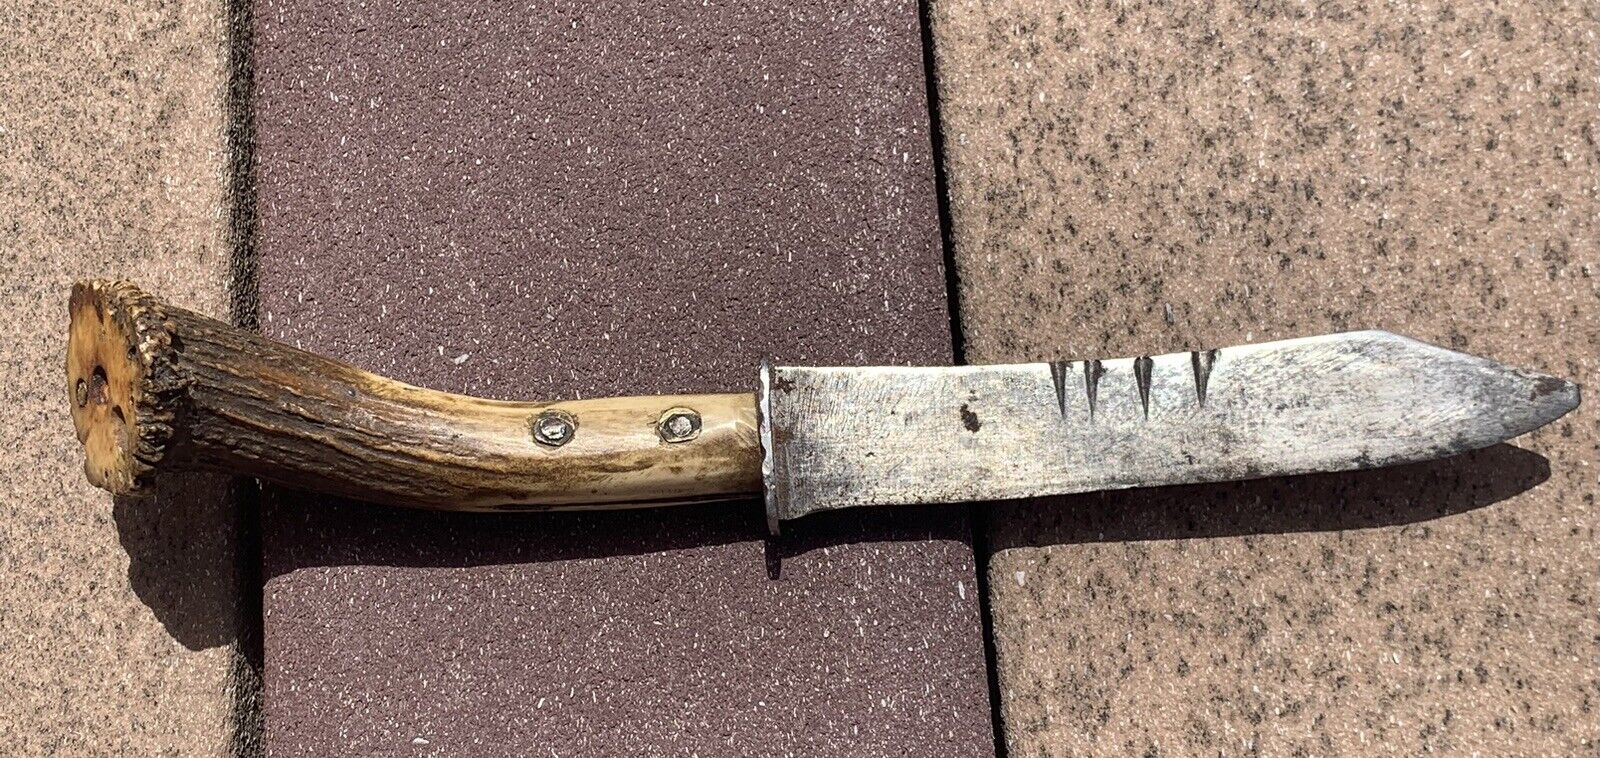 Very Early Primitive Frontier or Indian Used Knife ca. 1825-1850